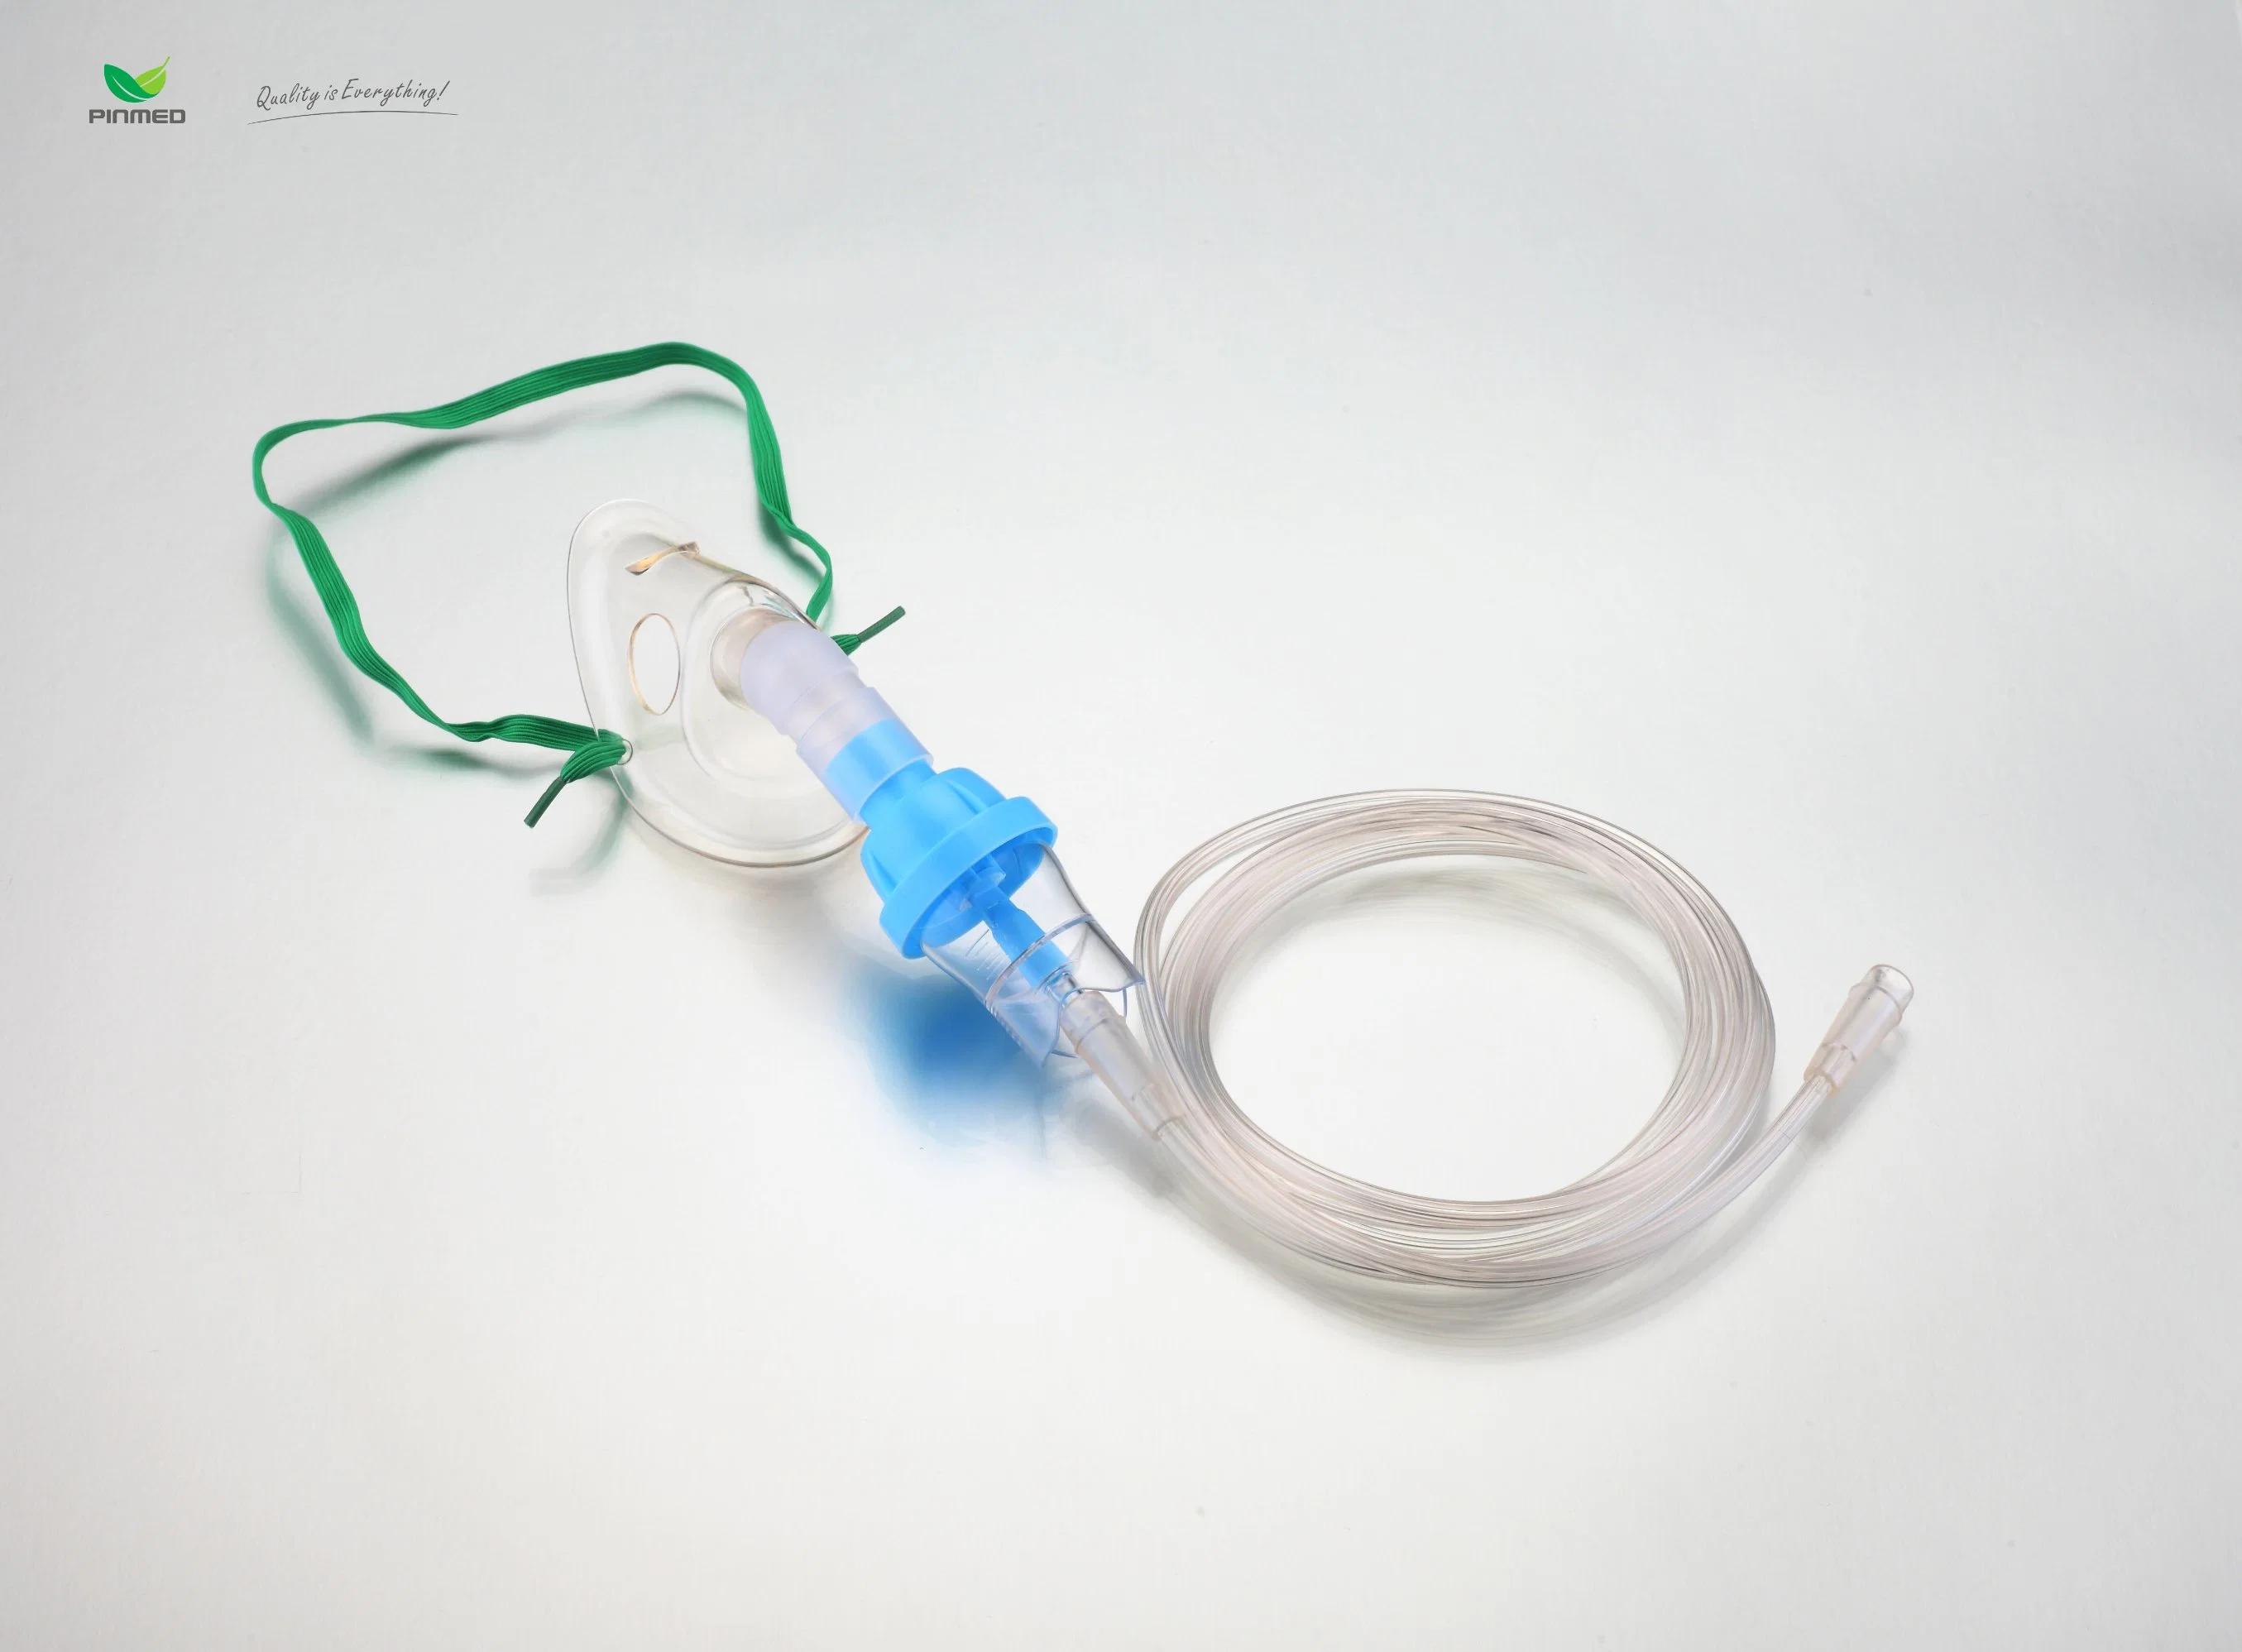 Medical Supply Disposable PVC Nebulizer Mask From Zhejiang Province